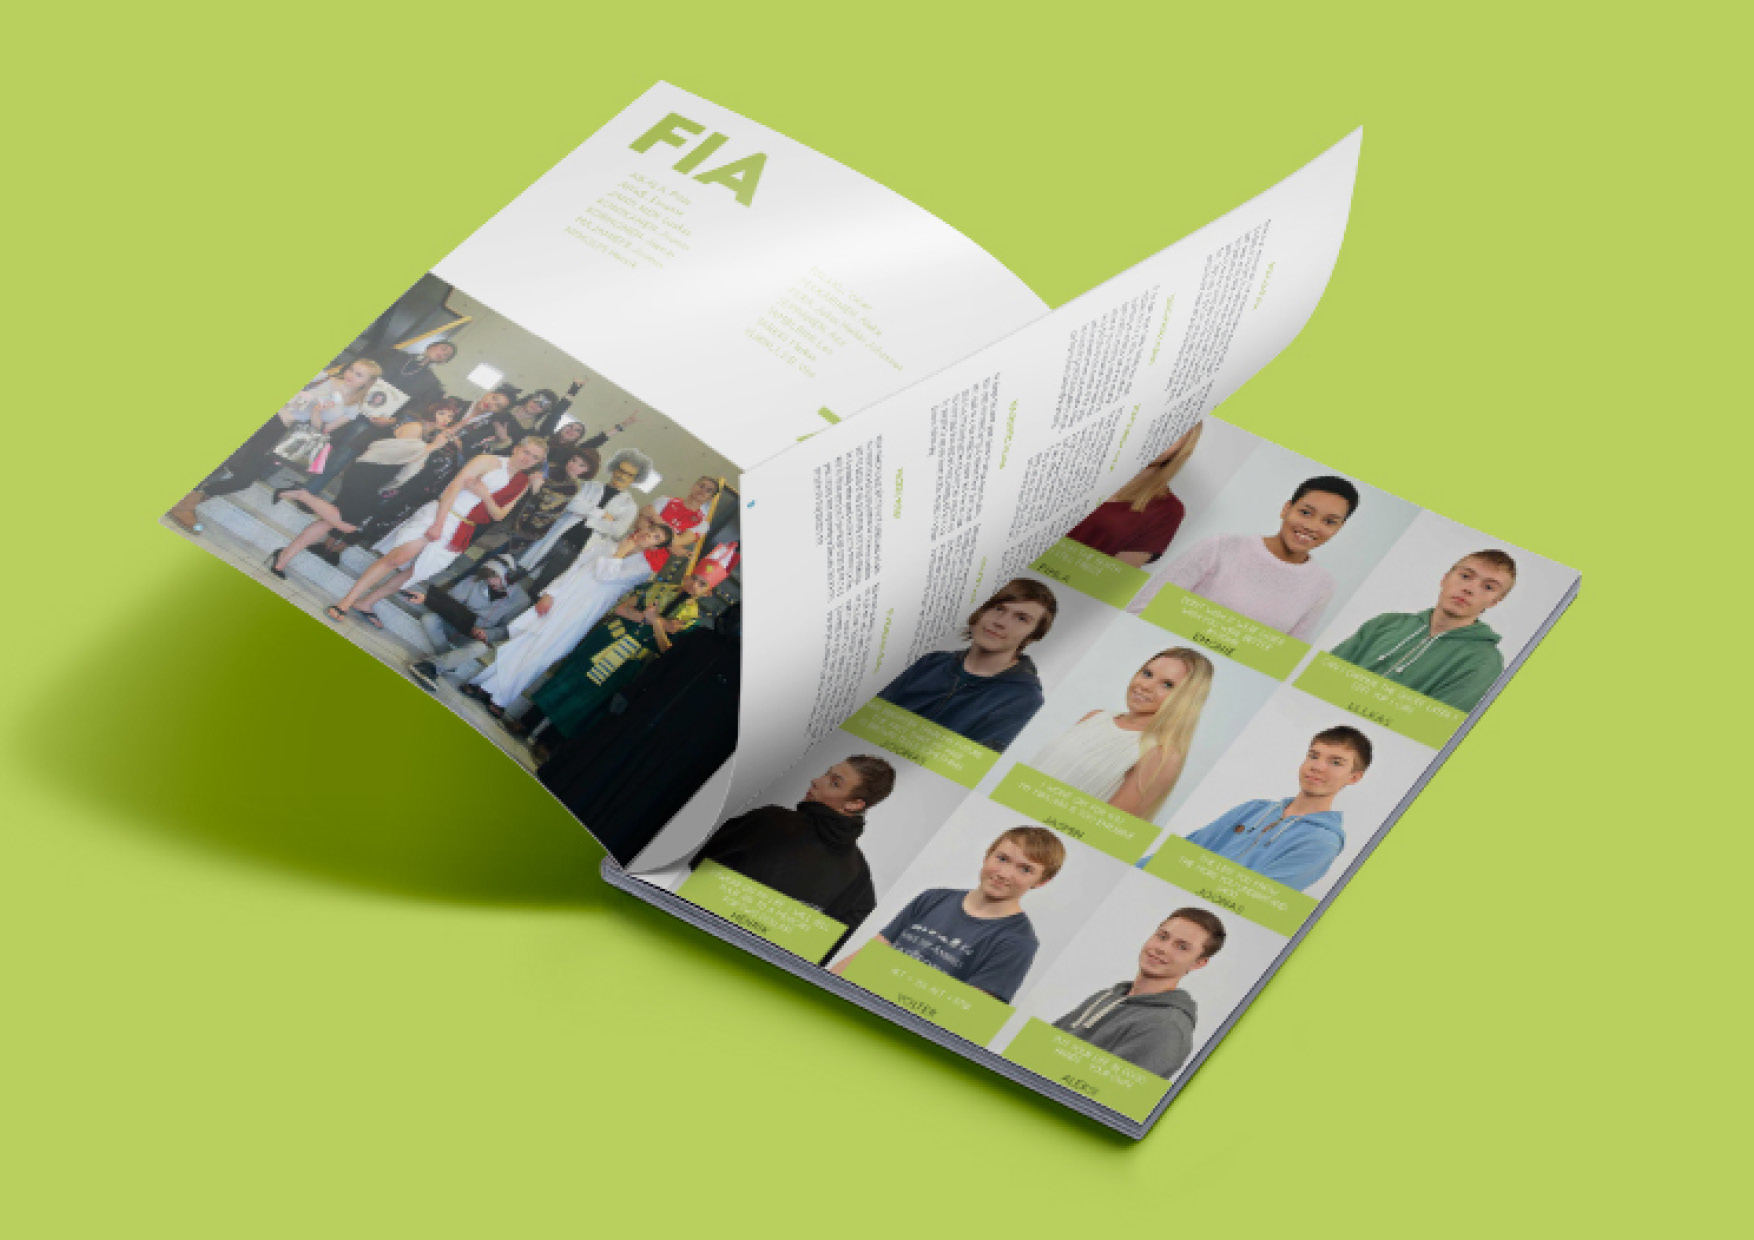 Euroschool Luxembourg I Yearbook 2014-2016 Yearbook layout design.